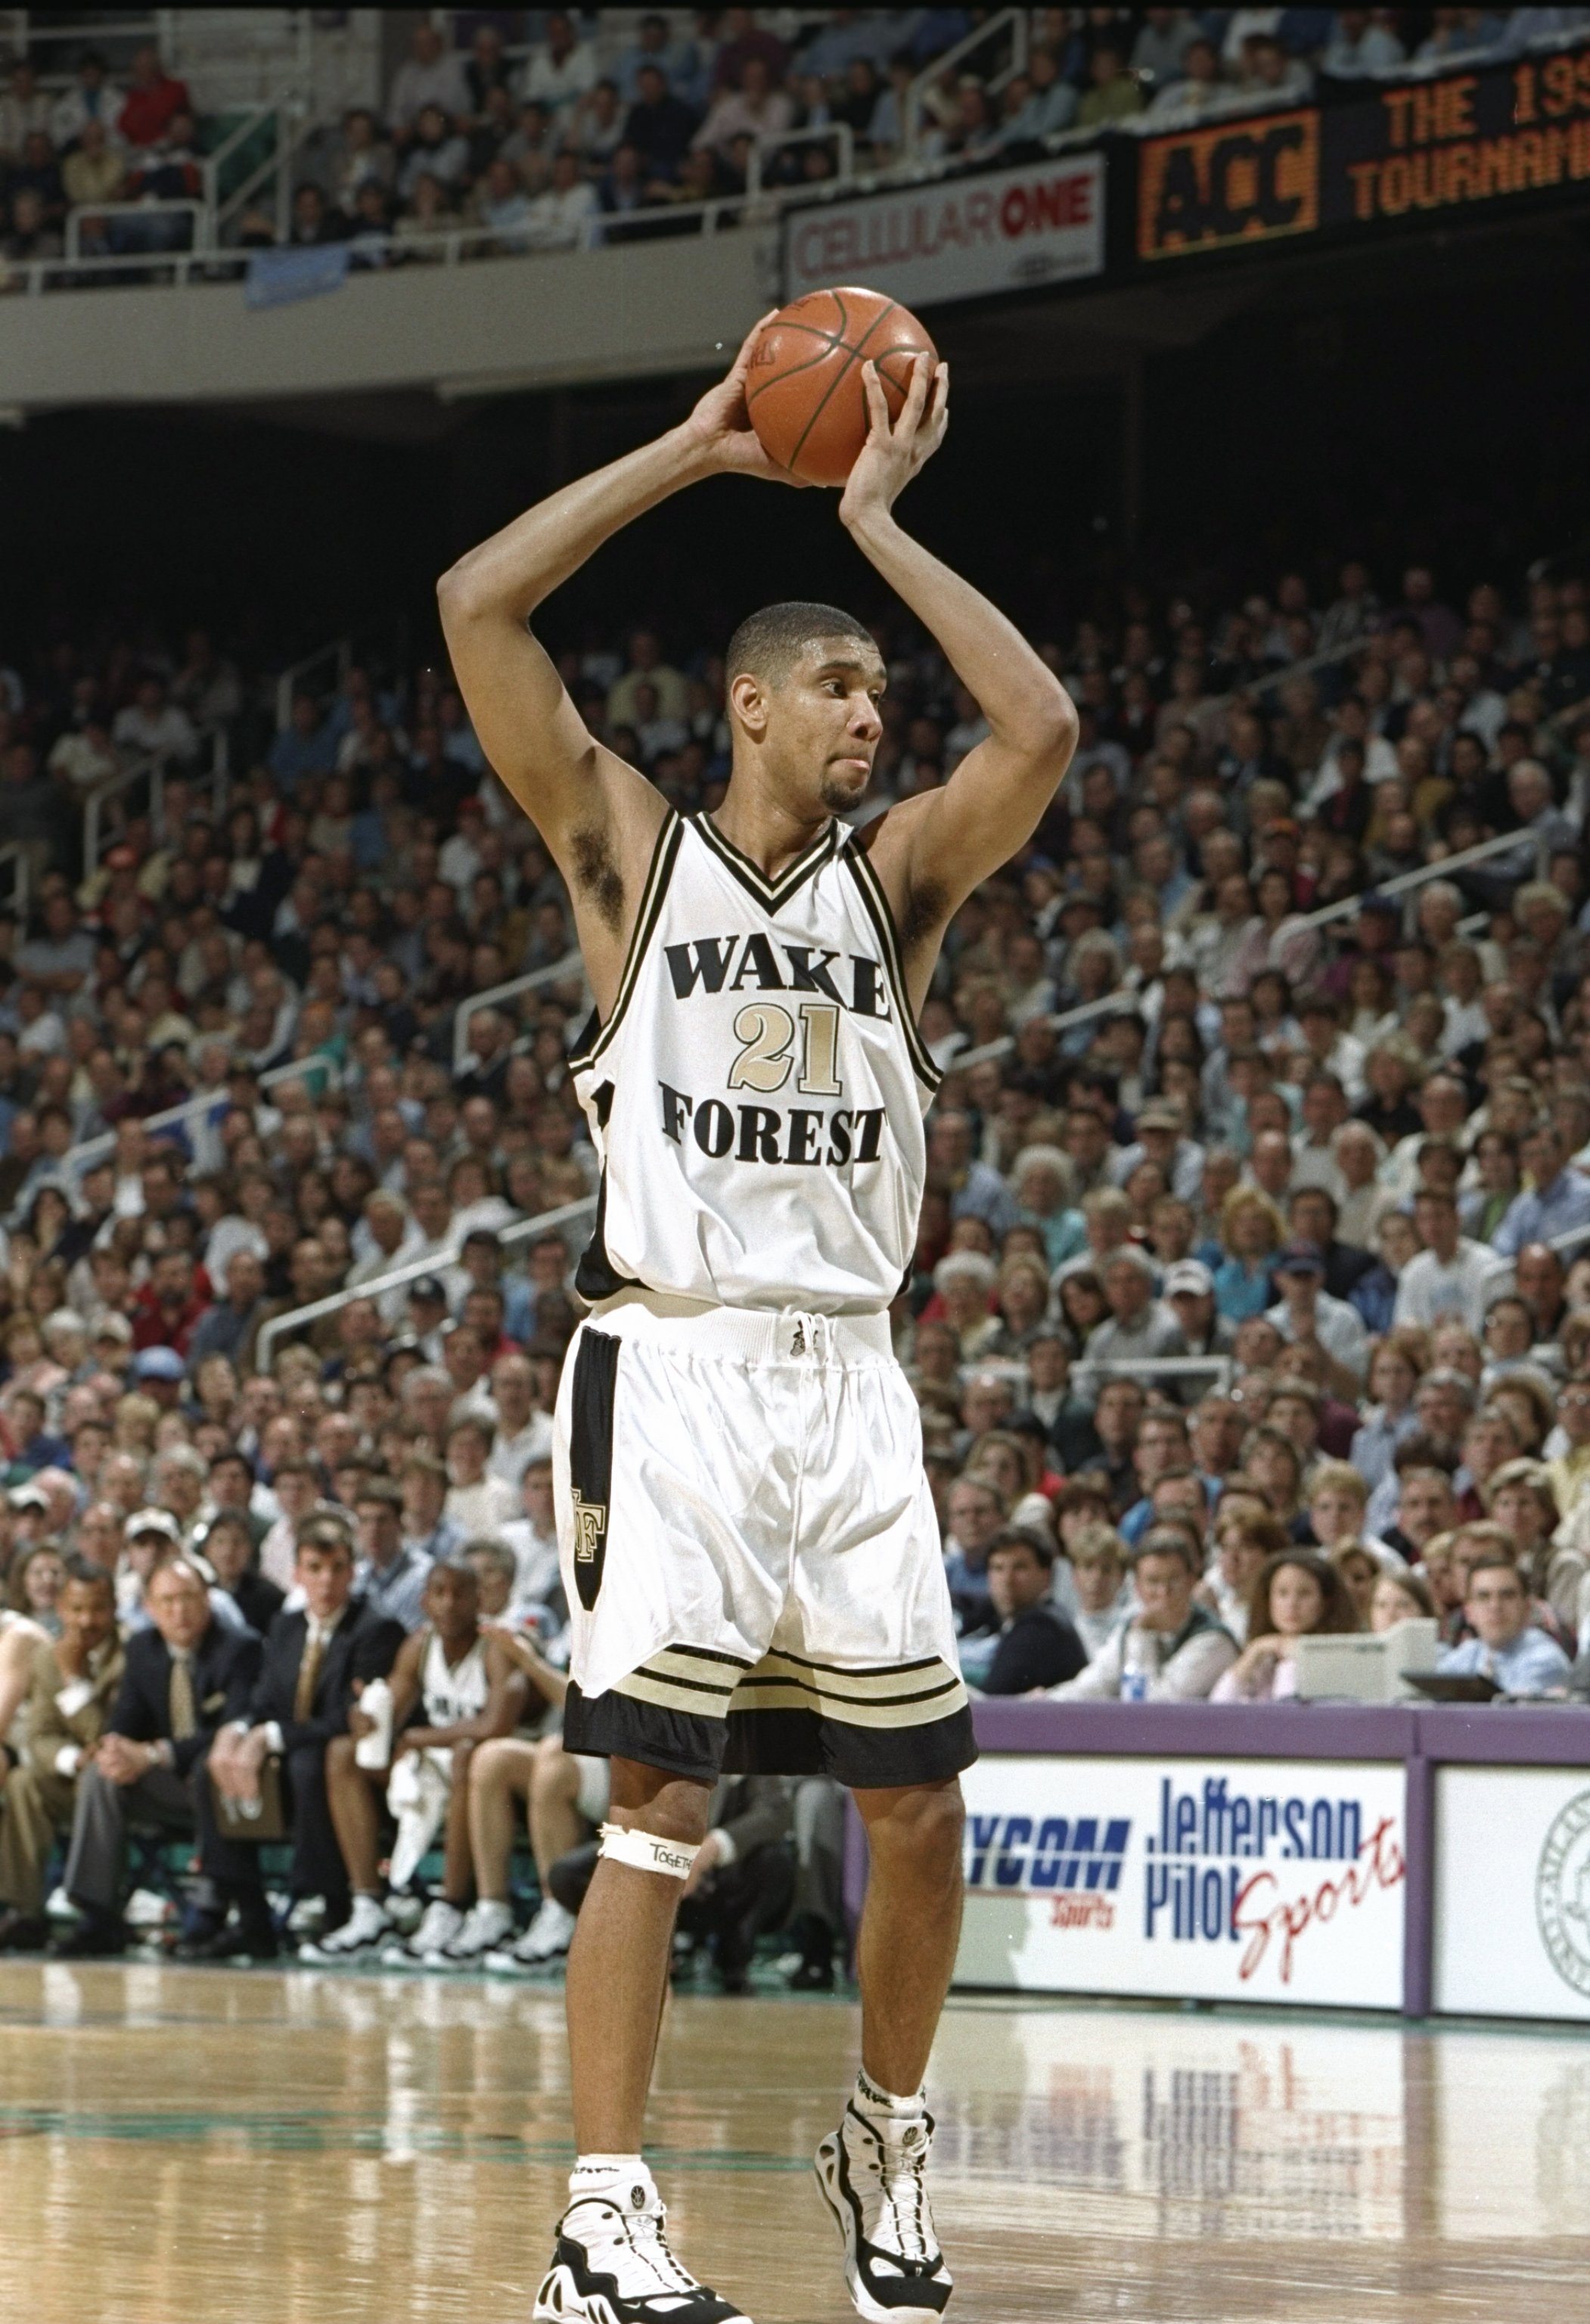 8 Mar 1997: Center Tim Duncan of the Wake Forest Demon Deacons stands on the court with the ball during a playoff game against the North Carolina Tarheels at the Greensboro Coliseum in Greensboro, North Carolina. North Carolina won the game 86-73.